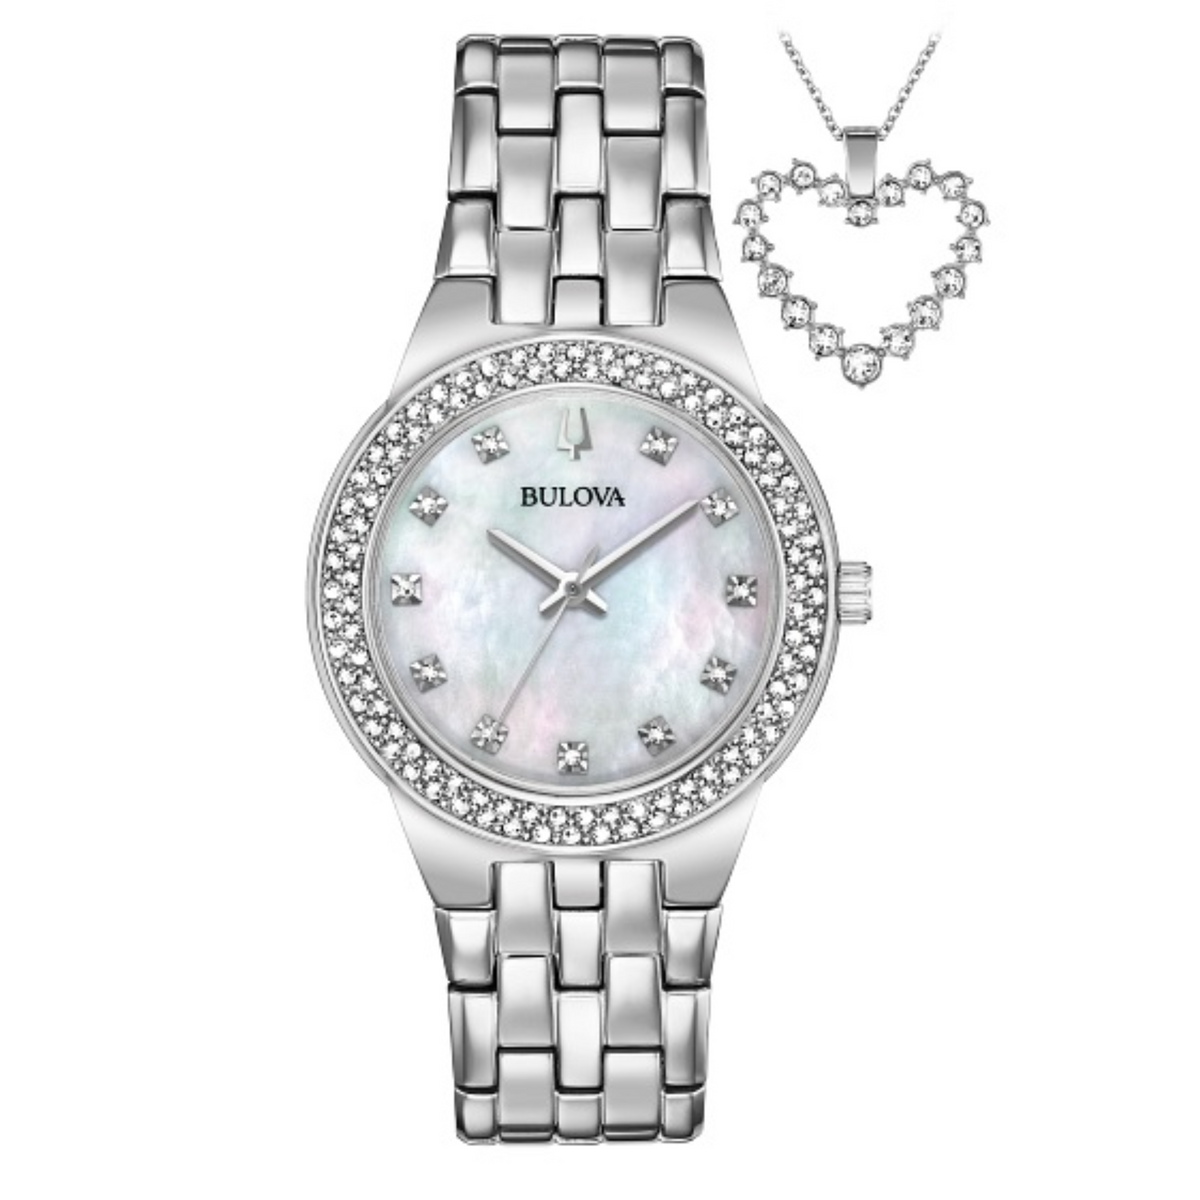 Bulova Crystal Stainless Mother of Pearl Watch with Matching Necklace 96X144